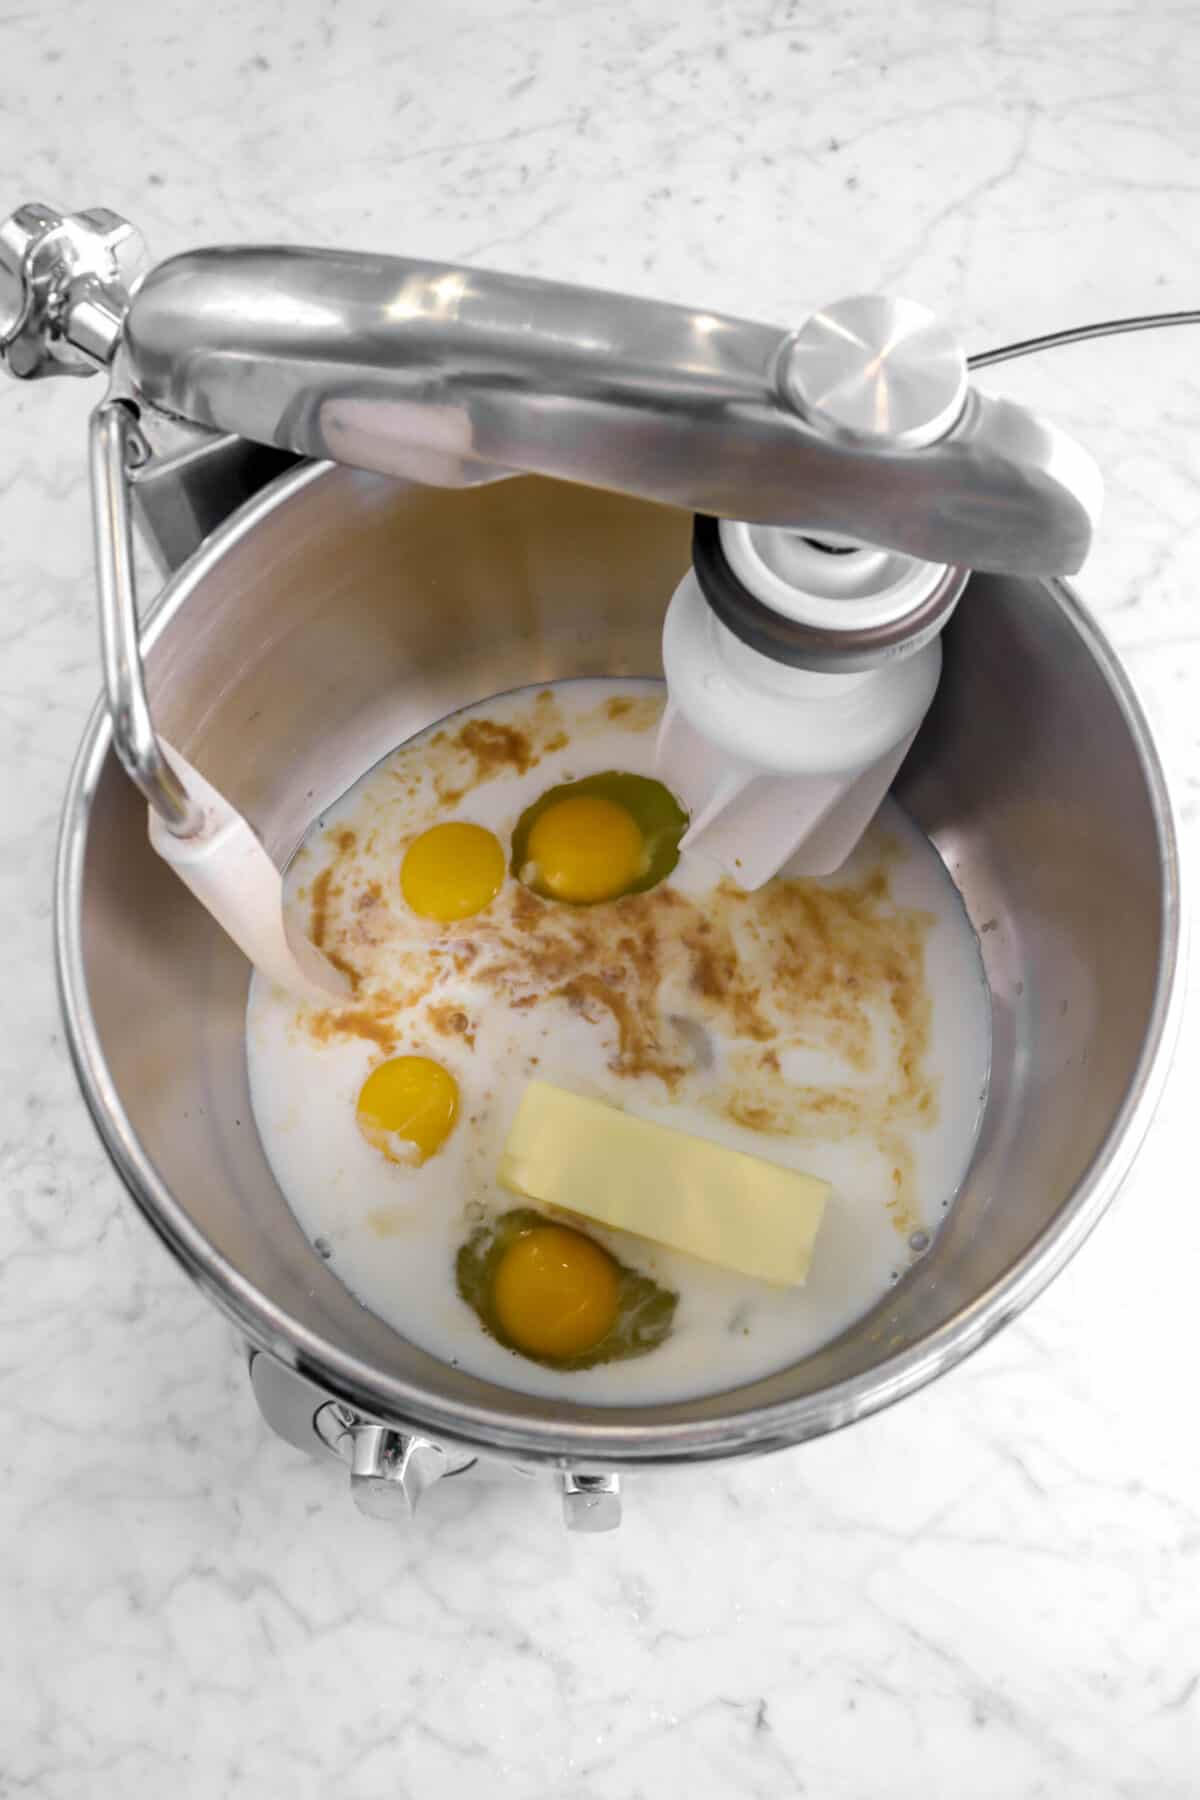 eggs, butter, milk, and vanilla in a mixer